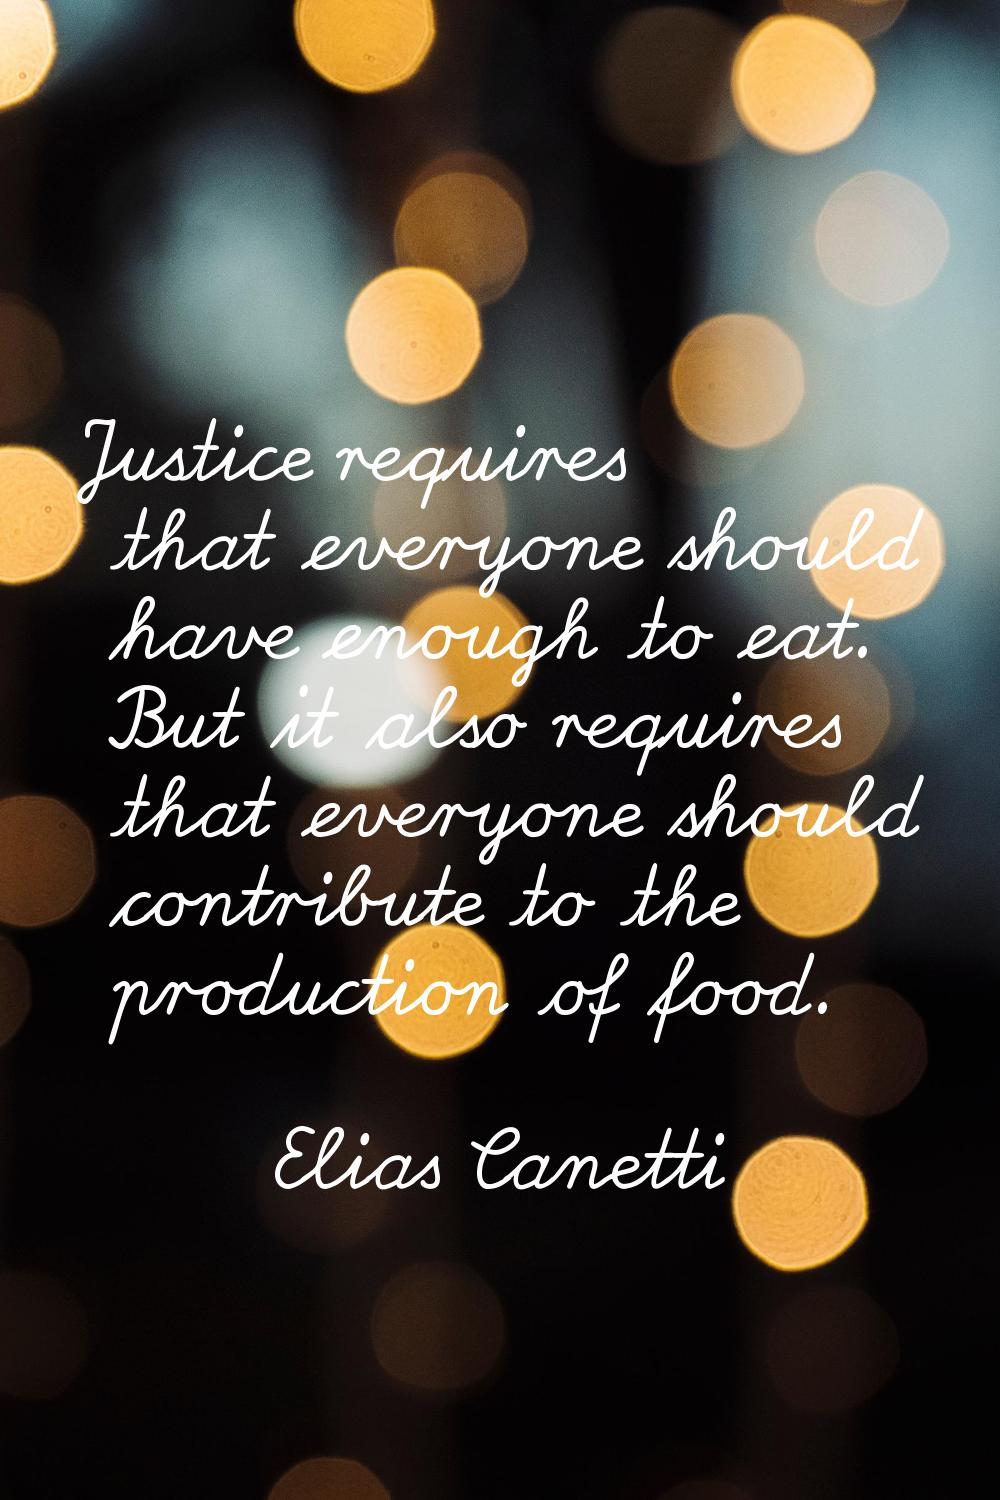 Justice requires that everyone should have enough to eat. But it also requires that everyone should